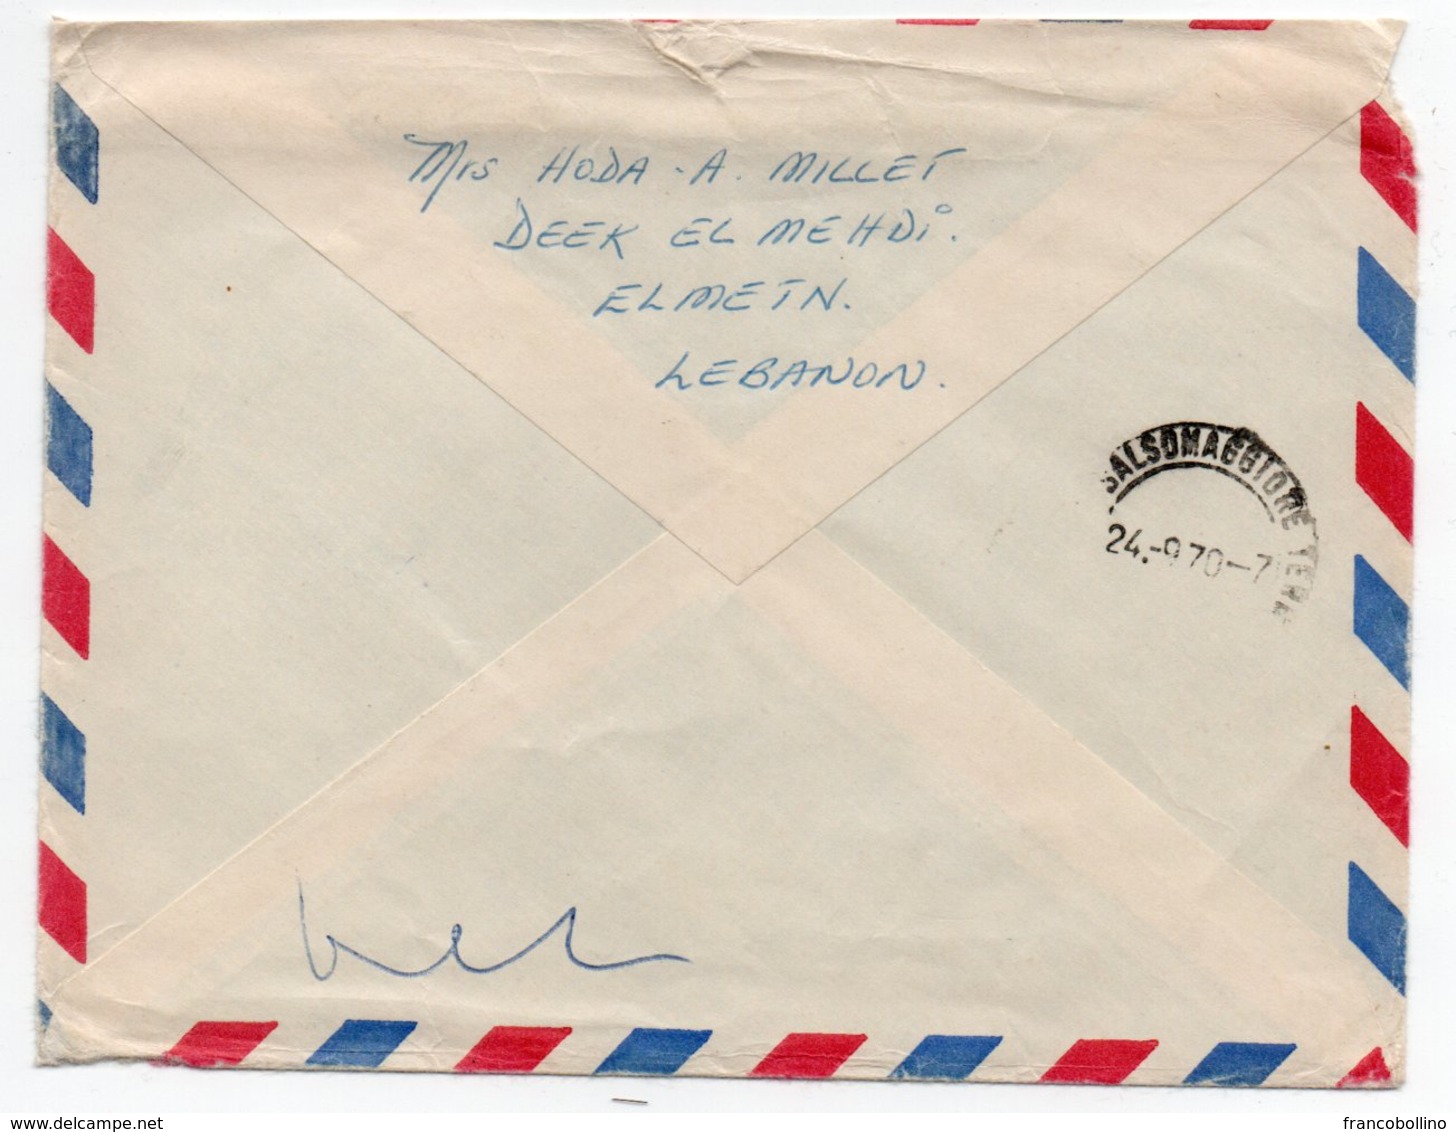 LIBAN/LEBANON - AIR MAIL COVER TO ITALY 1970 / JALL-EL-DID CANCEL / THEMATIC STAMPS-PARACHUTE / CAMELS - Libano